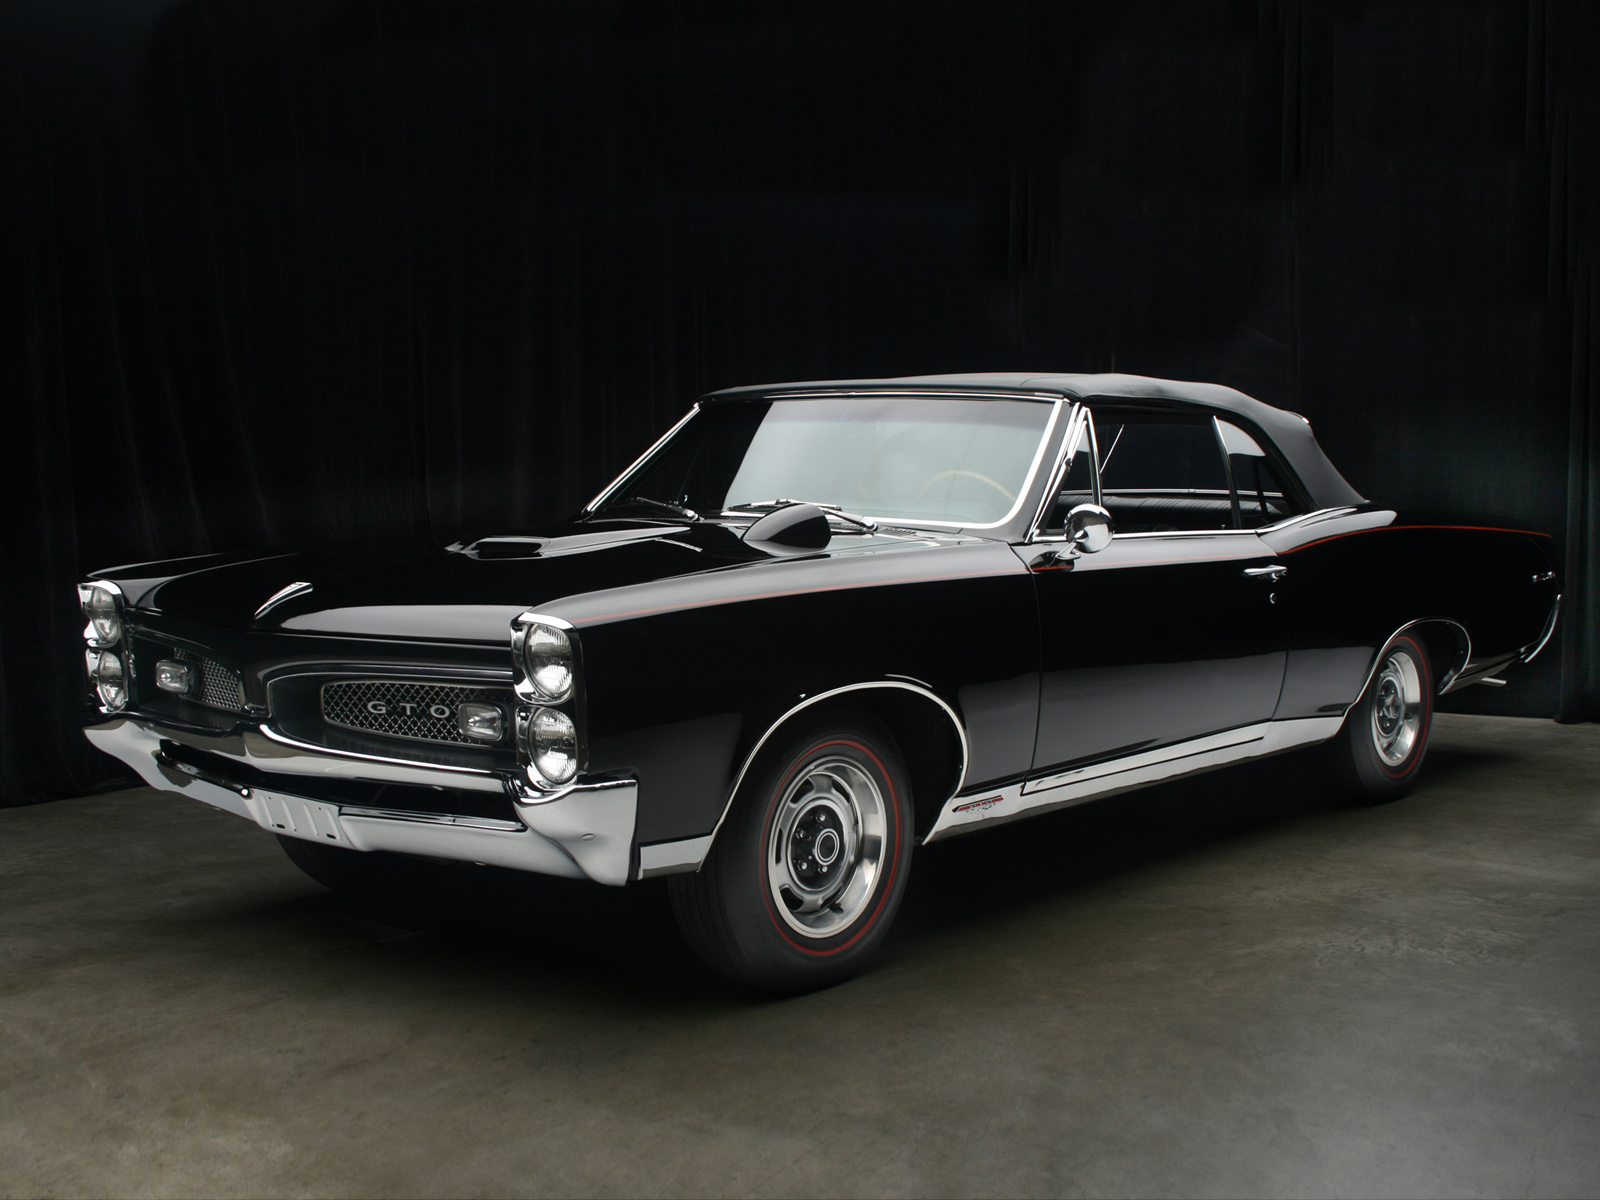 1967, Pontiac, Tempest, Gto, Ho, Convertible, Muscle, Classic, H o Wallpaper